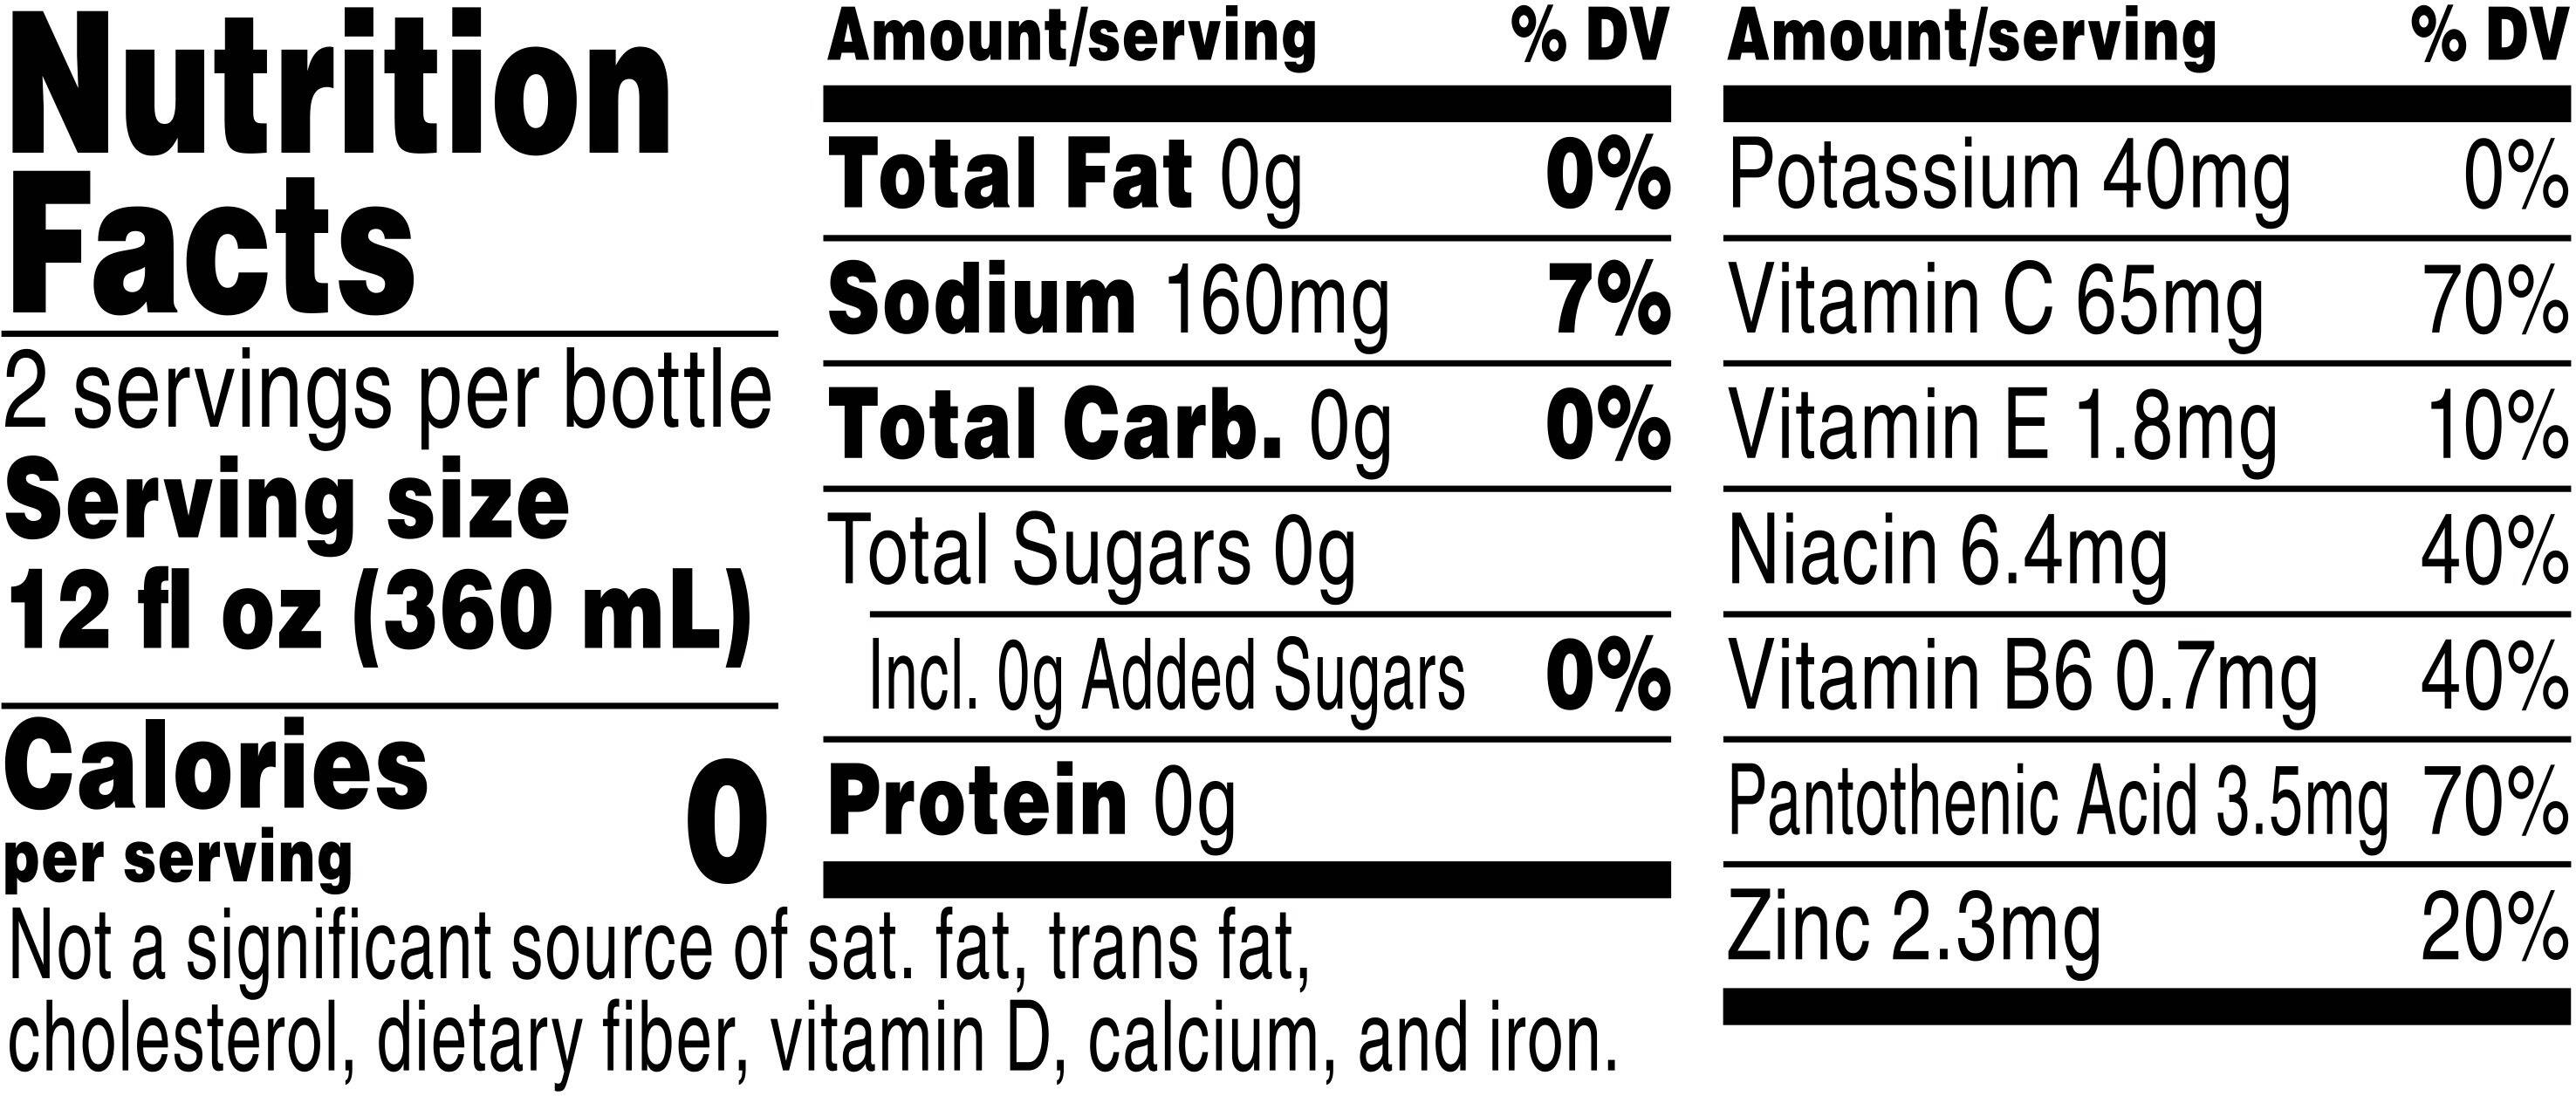 Image describing nutrition information for product Propel Immune Support Orange Raspberry